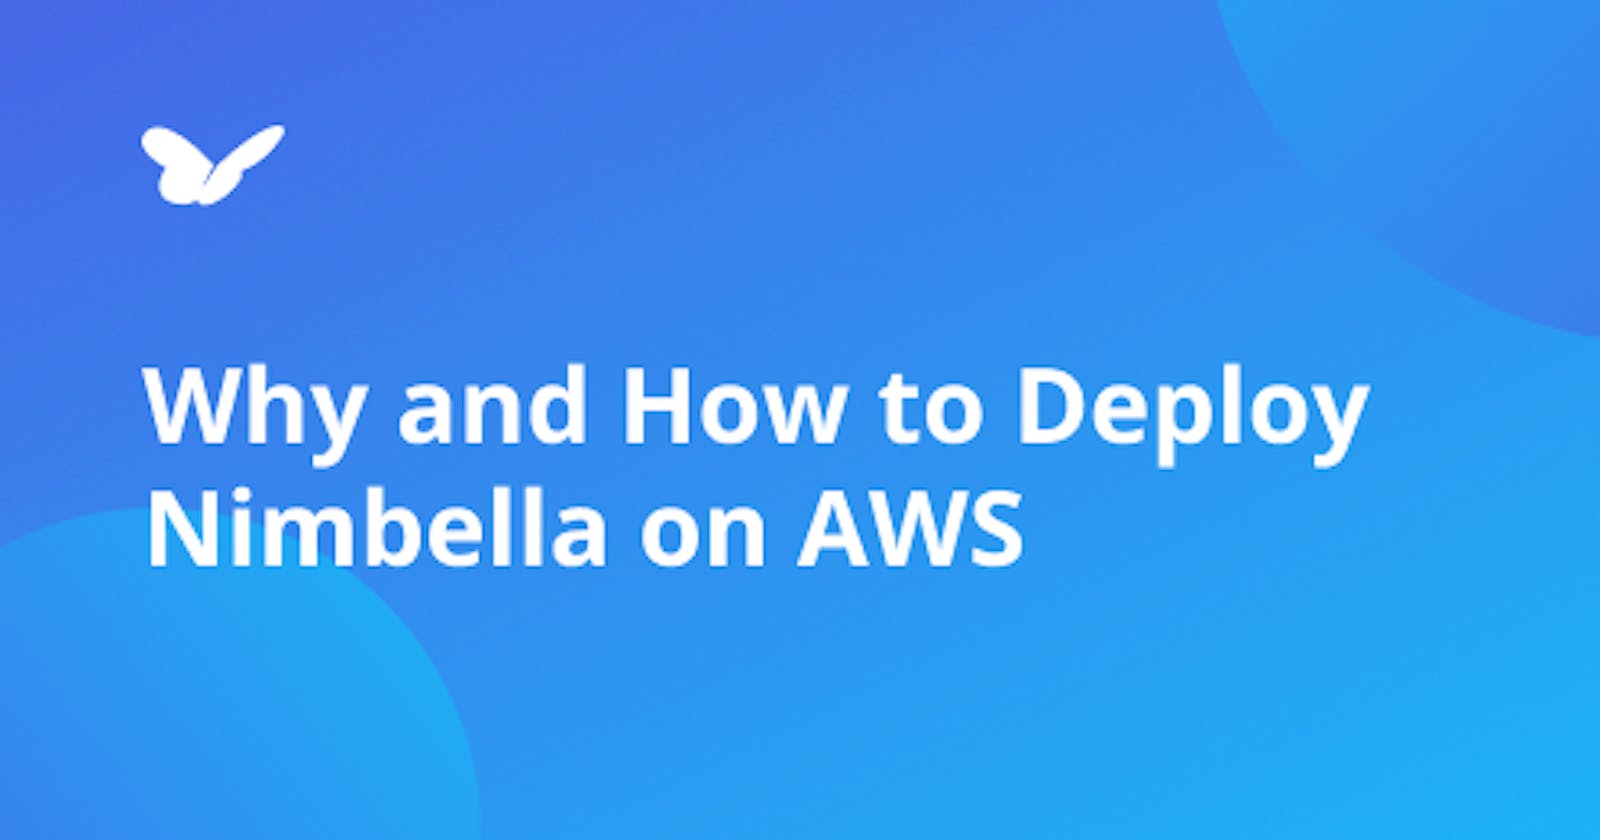 Step by step guide on how to port from AWS to Nimbella